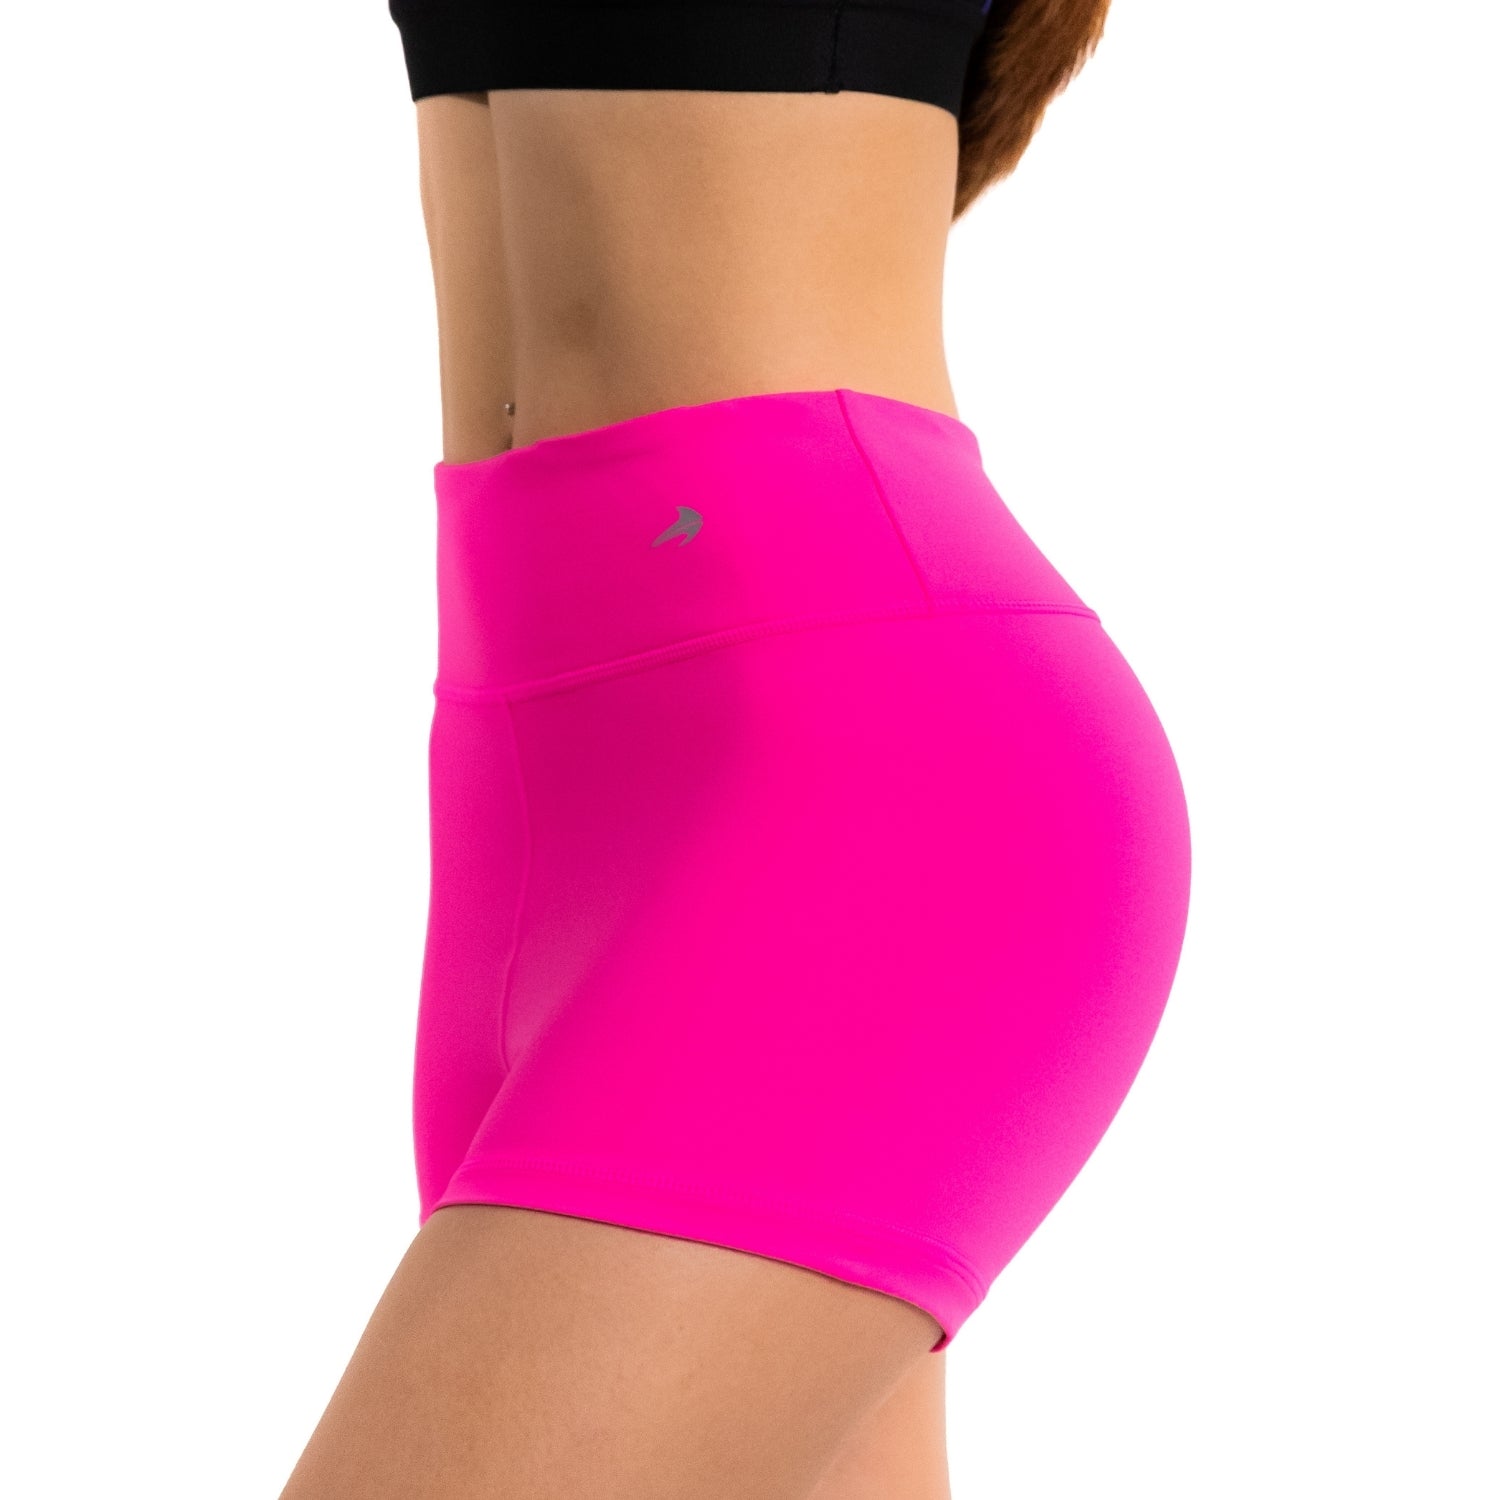 Women's Compression Shorts - Pink